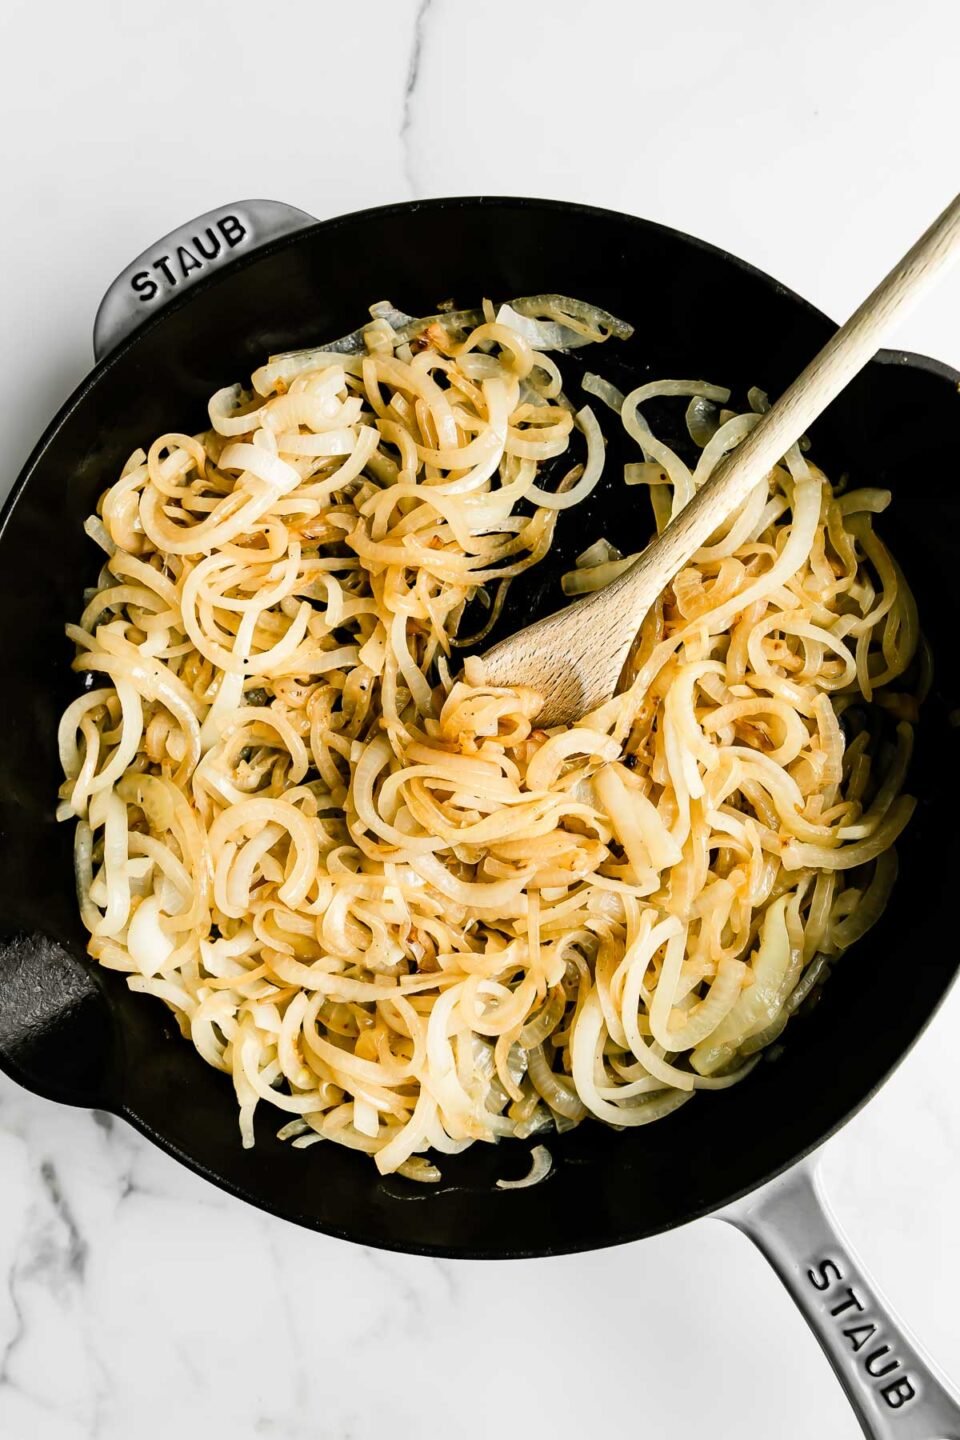 Thinly sliced sweet onions fill a large gray Staub cast iron skillet that sits atop a white and gray marble surface. The onions soften and wooden spoon rests inside of the skillet for stirring.